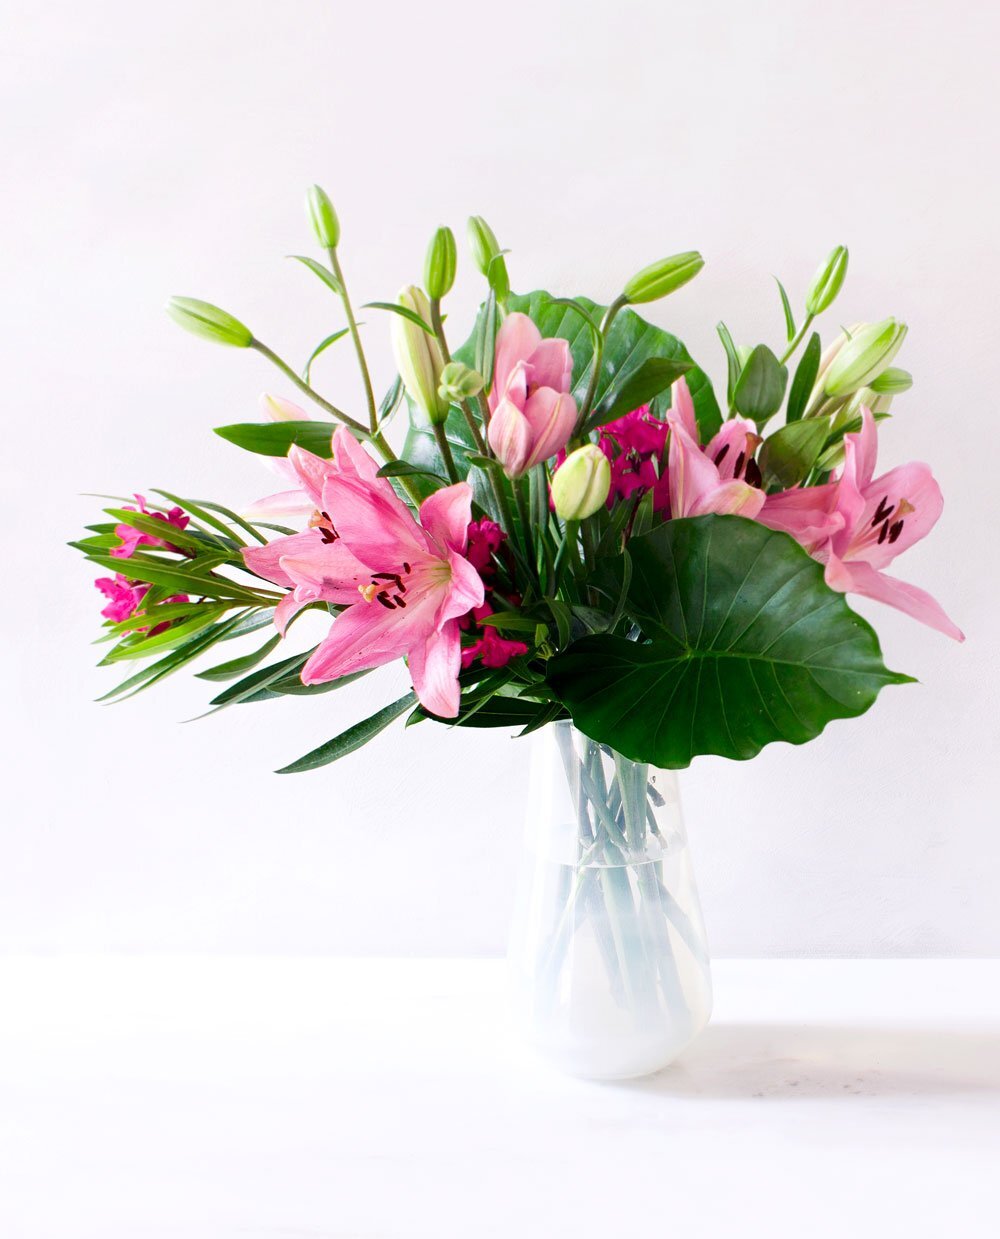 Flower Arrangement DIY - Line Your Vase With Leaves To Hide The Flower Stems